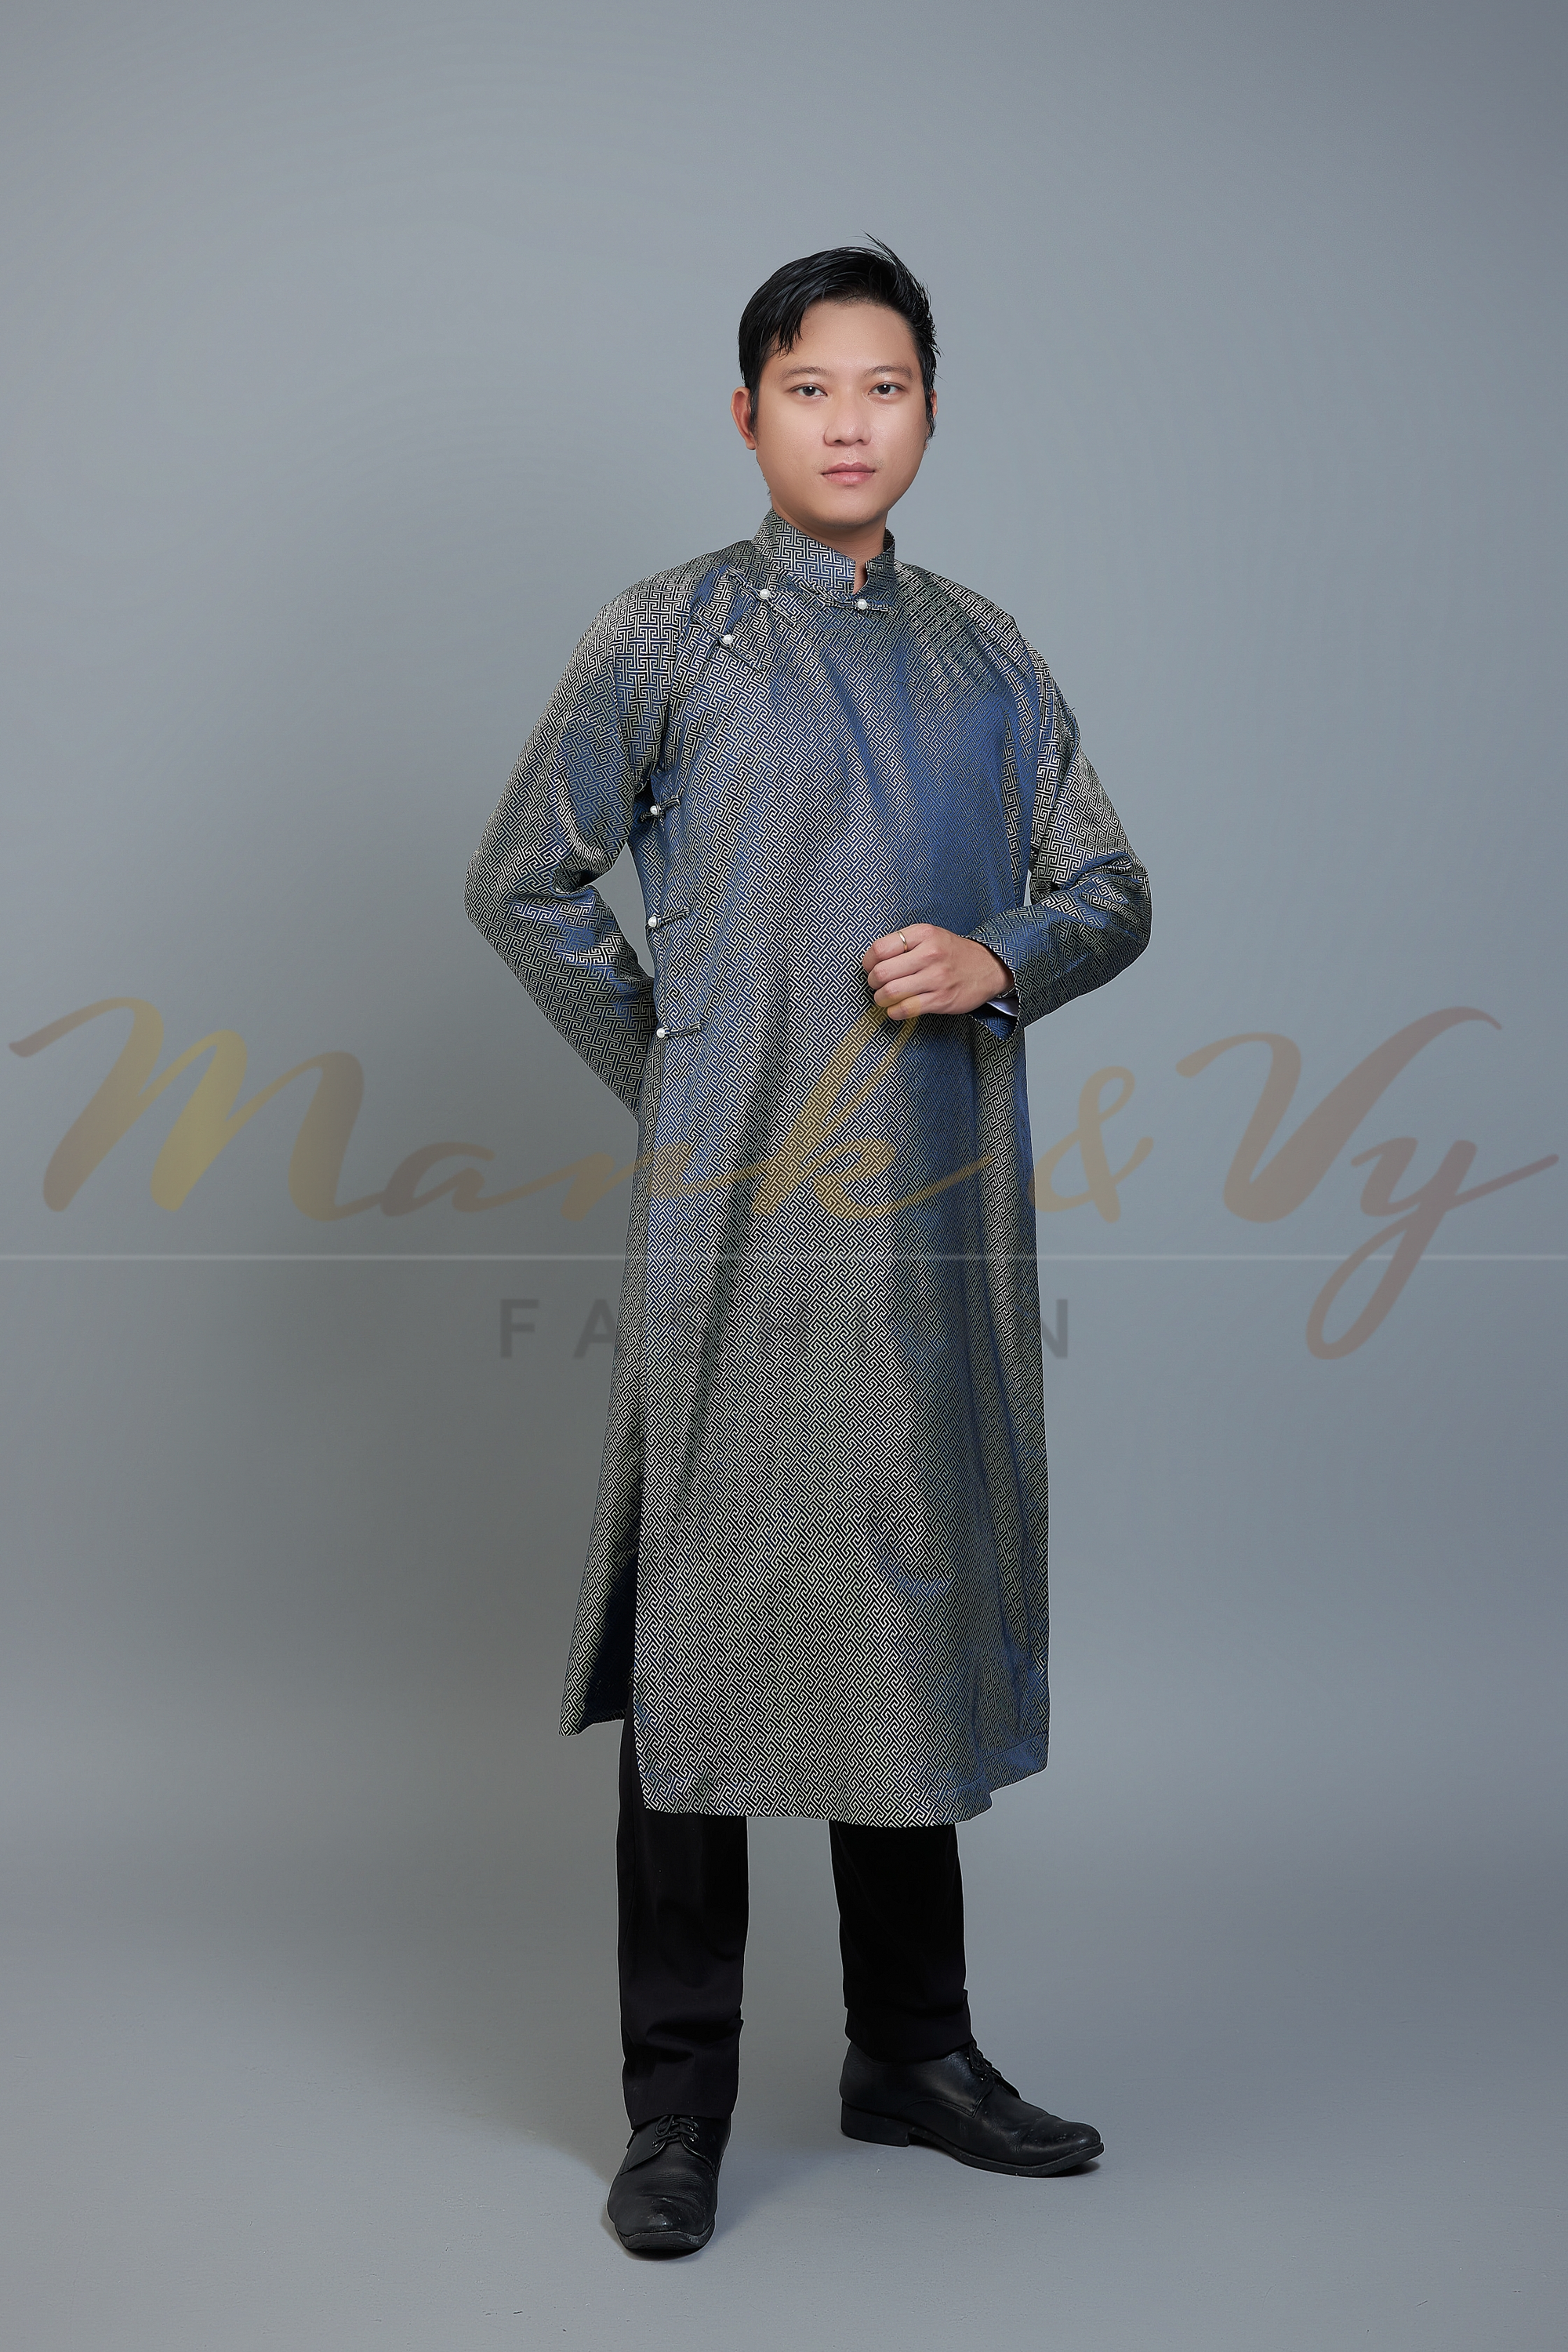 Men's ao dai in dark blue and champagne color - Vietnamese national clothing. Free custom fit.